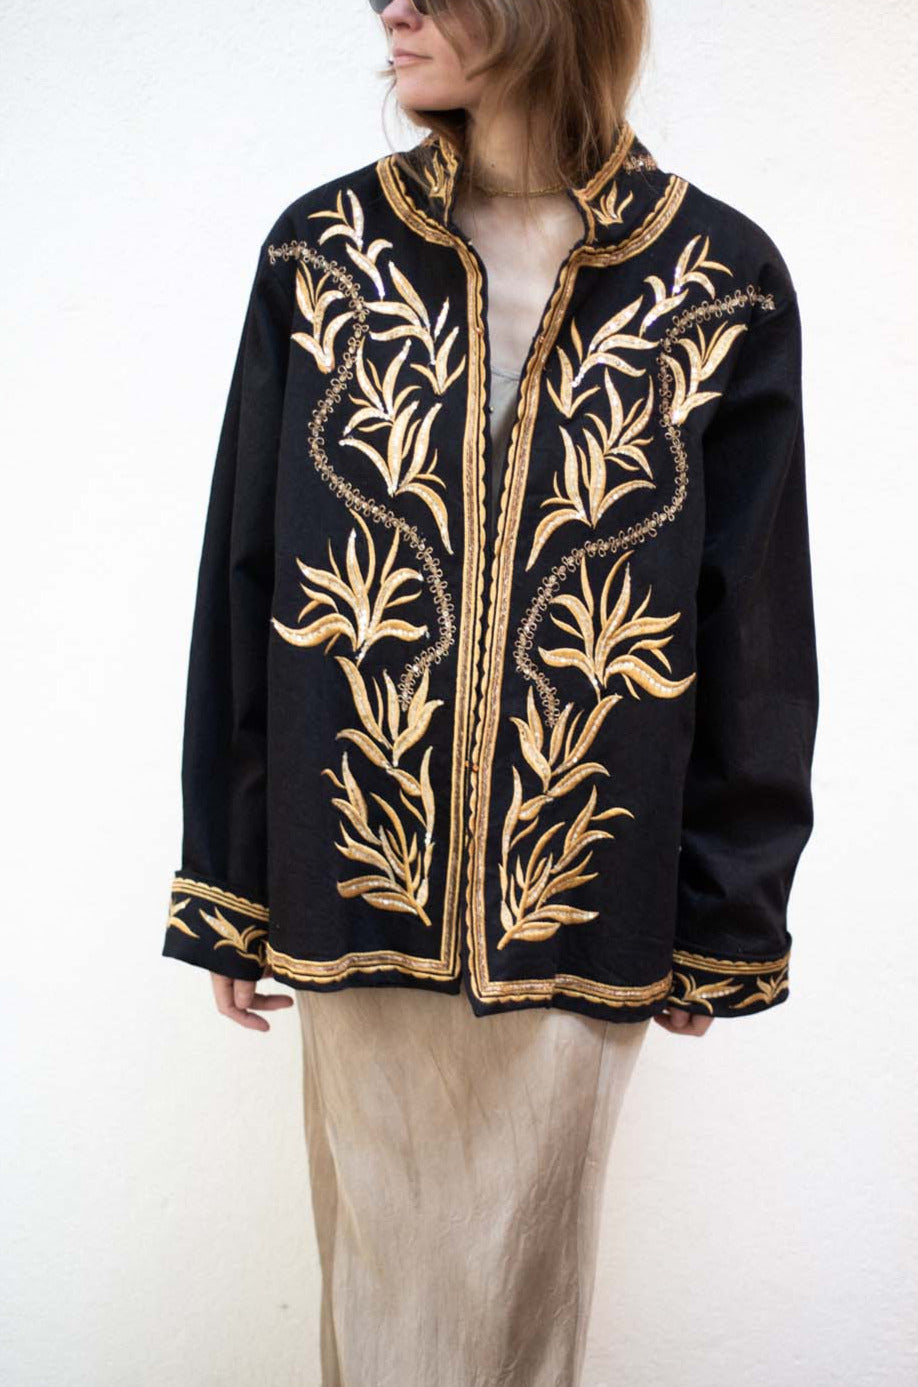 Embroidered Jacket Black W/ Gold Thread Vintage Style